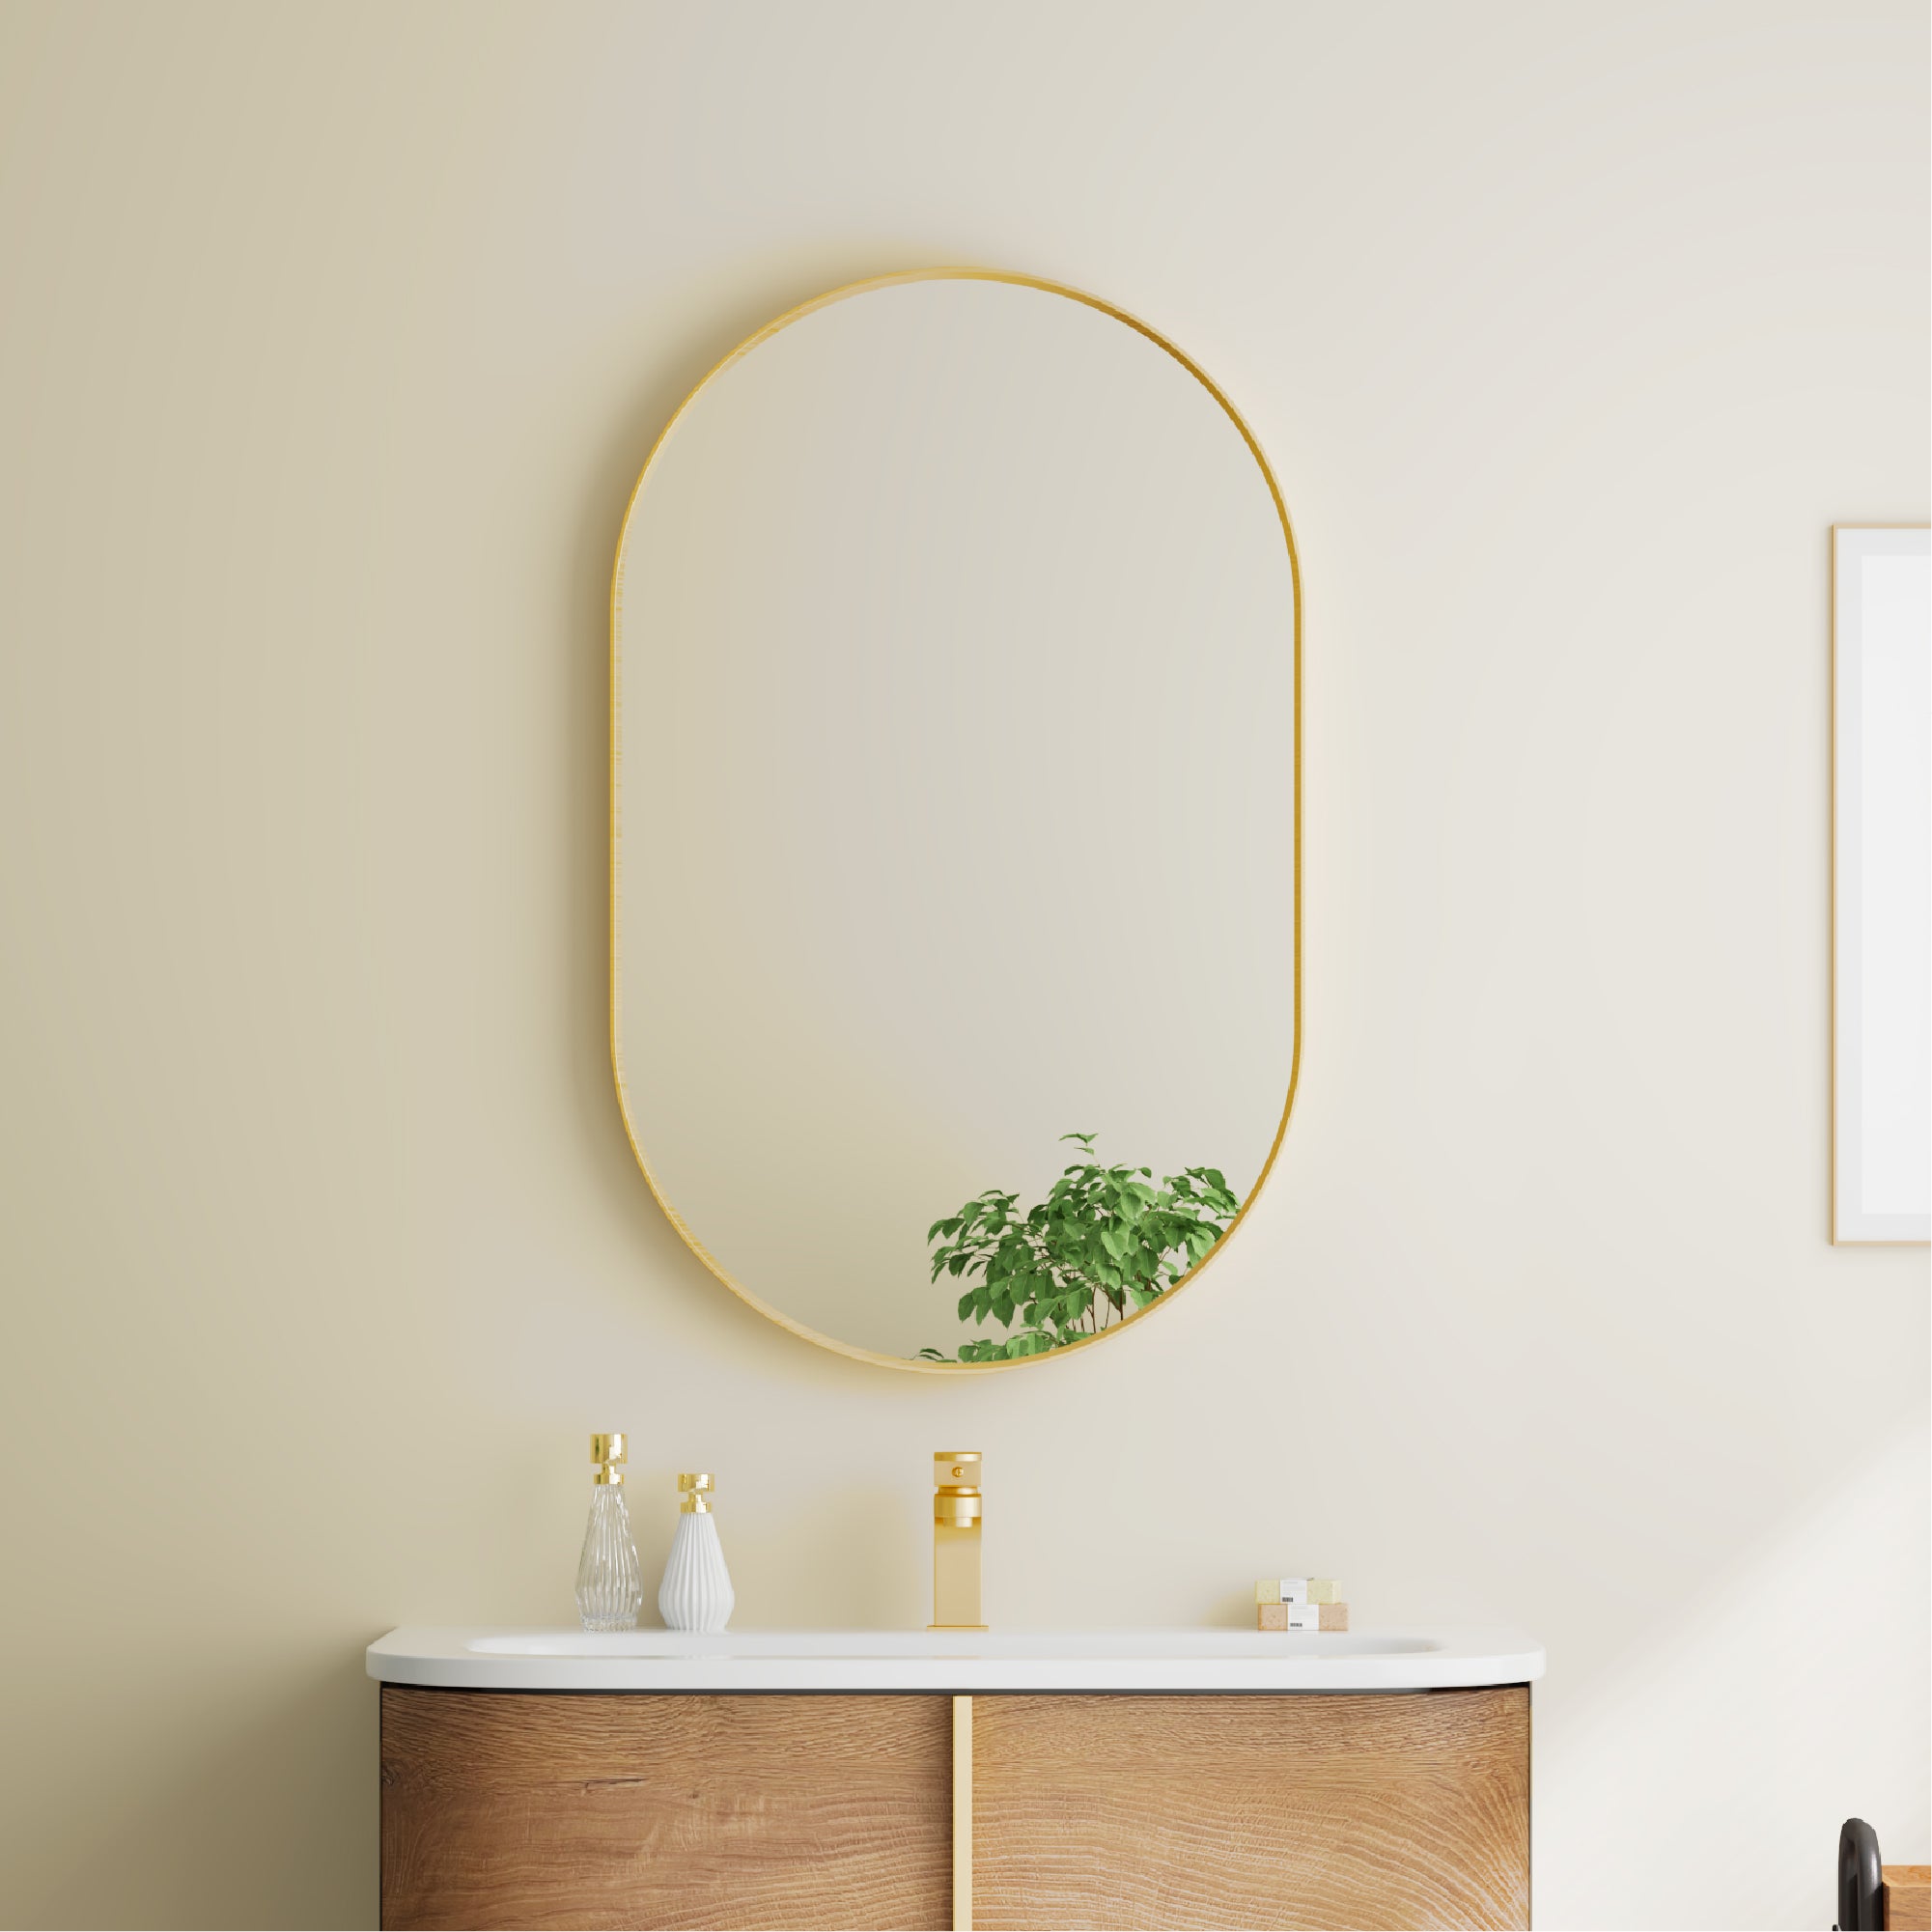 20 in. W x 32 in. H Oval Framed Wall Mount Bathroom Vanity Mirror in Brushed Gold